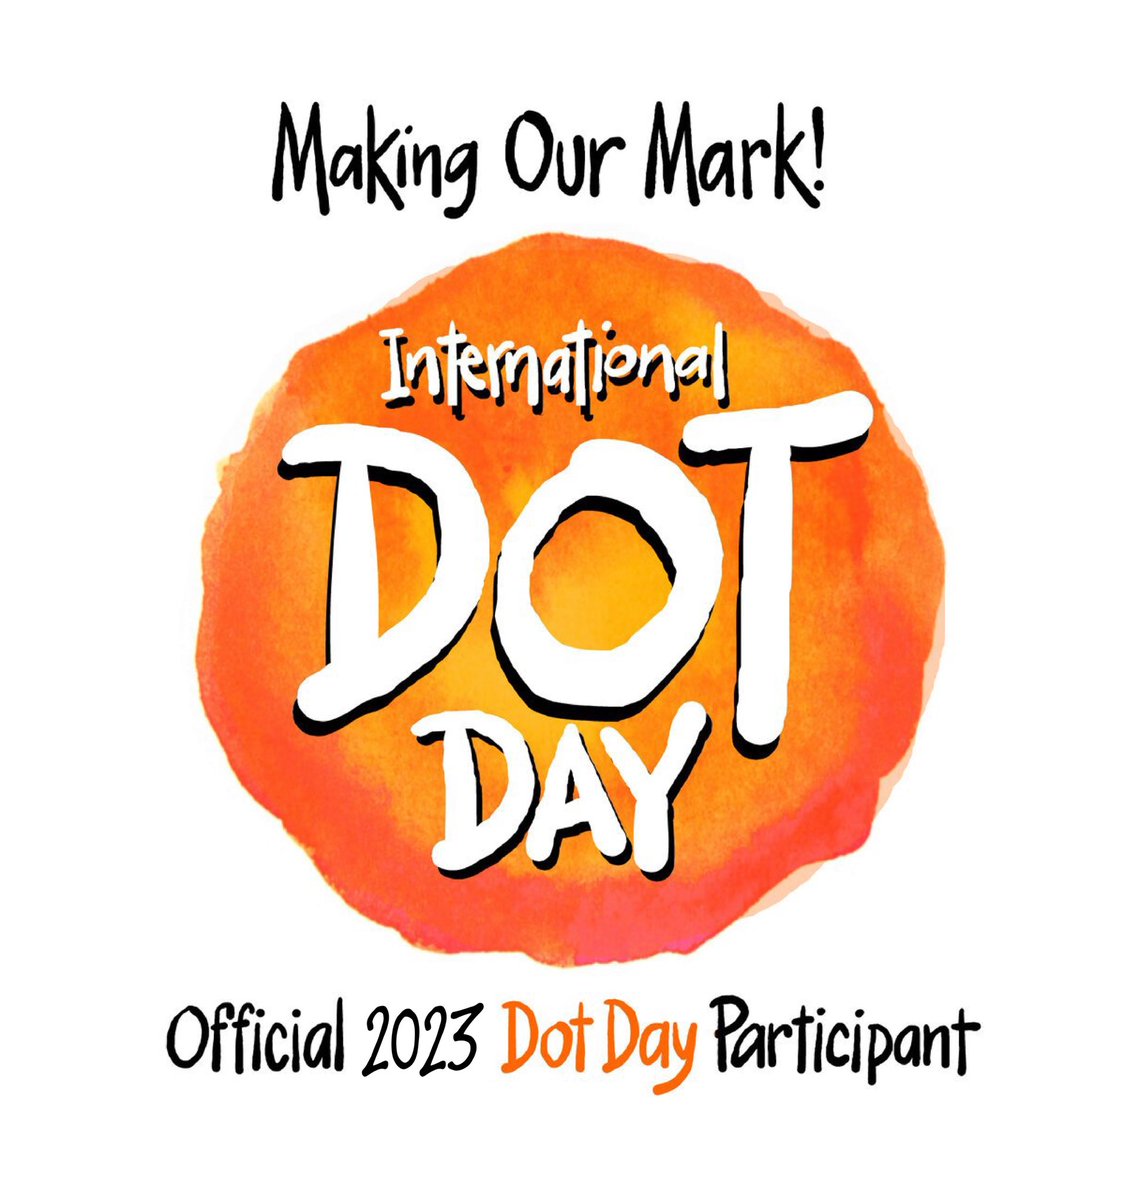 Here it is! The #InternationalDotDay participation digital badge. Feel free to use & share!